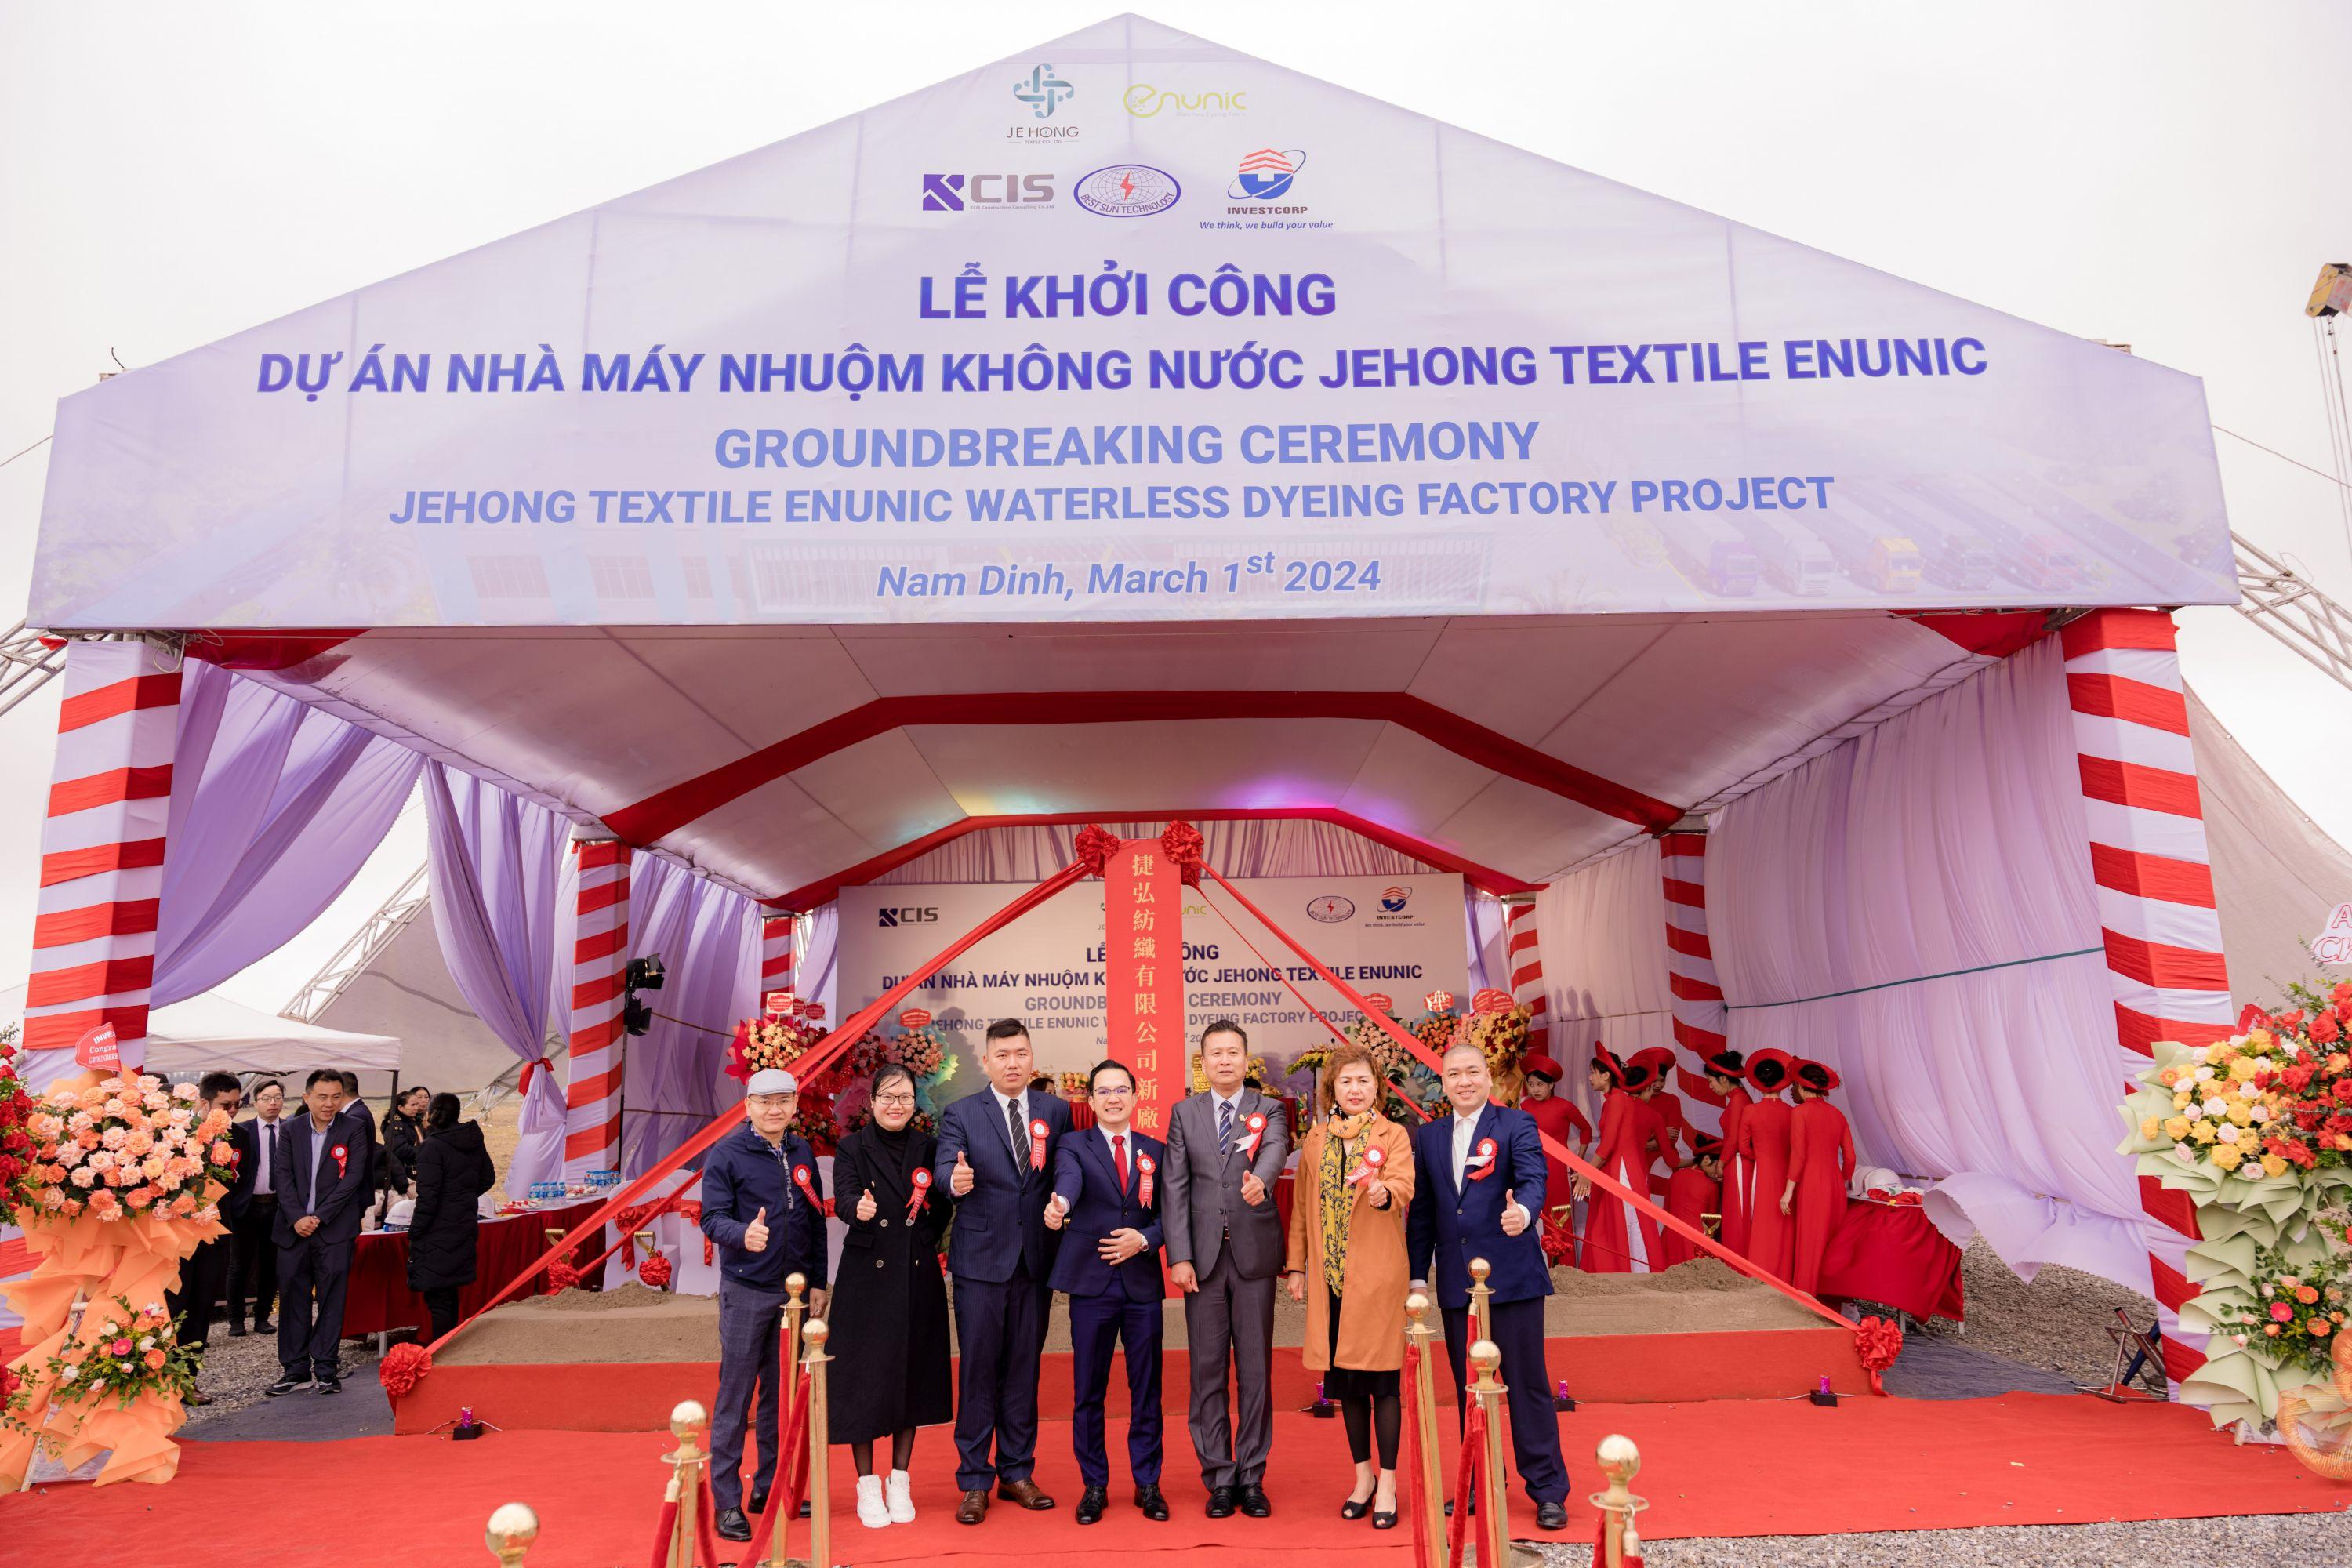 GROUNDBREAKING CEREMONY OF JEHONG TEXTILE VIETNAM'S DYEING FACTORY PROJECT AT AURORA IP INDUSTRIAL PARK